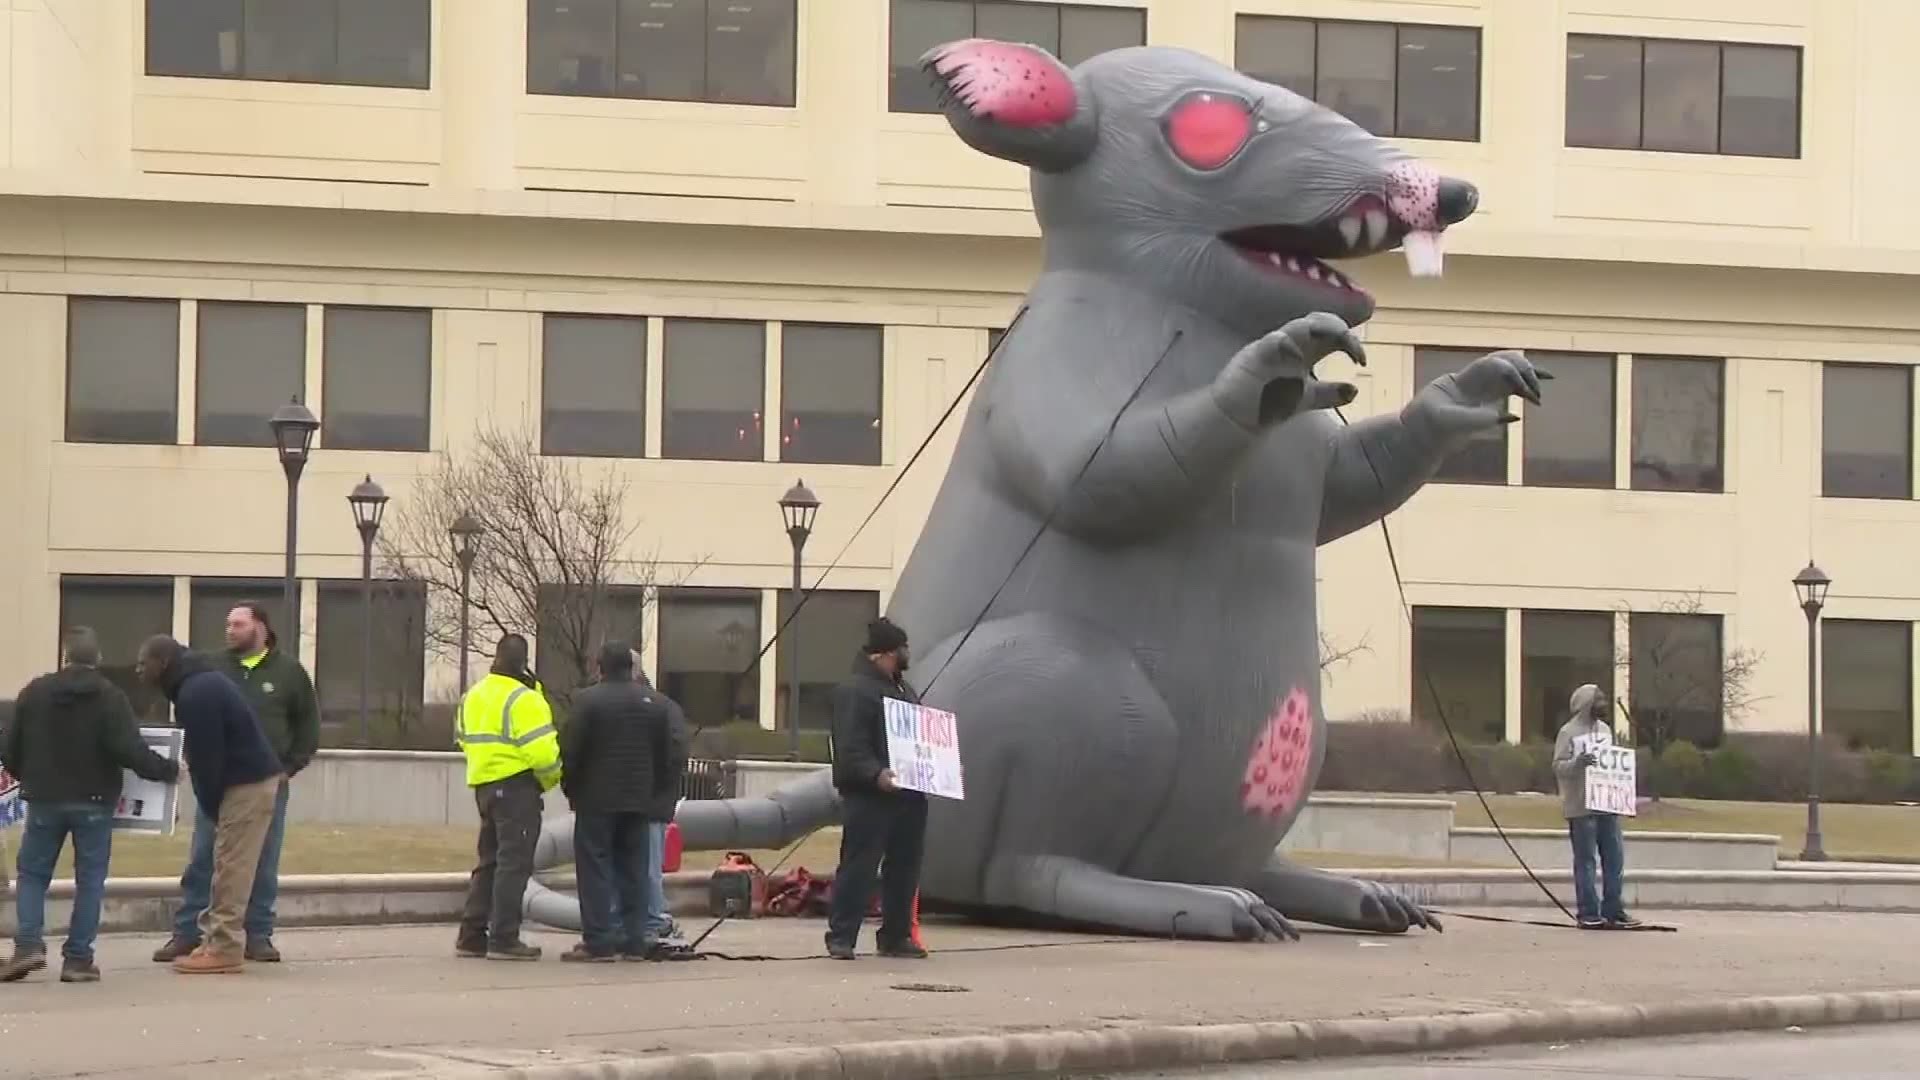 Flanked by two inflatable rats, the workers held a series of signs with different messages protesting conditions at the Cuyahoga County Juvenile Justice Center.